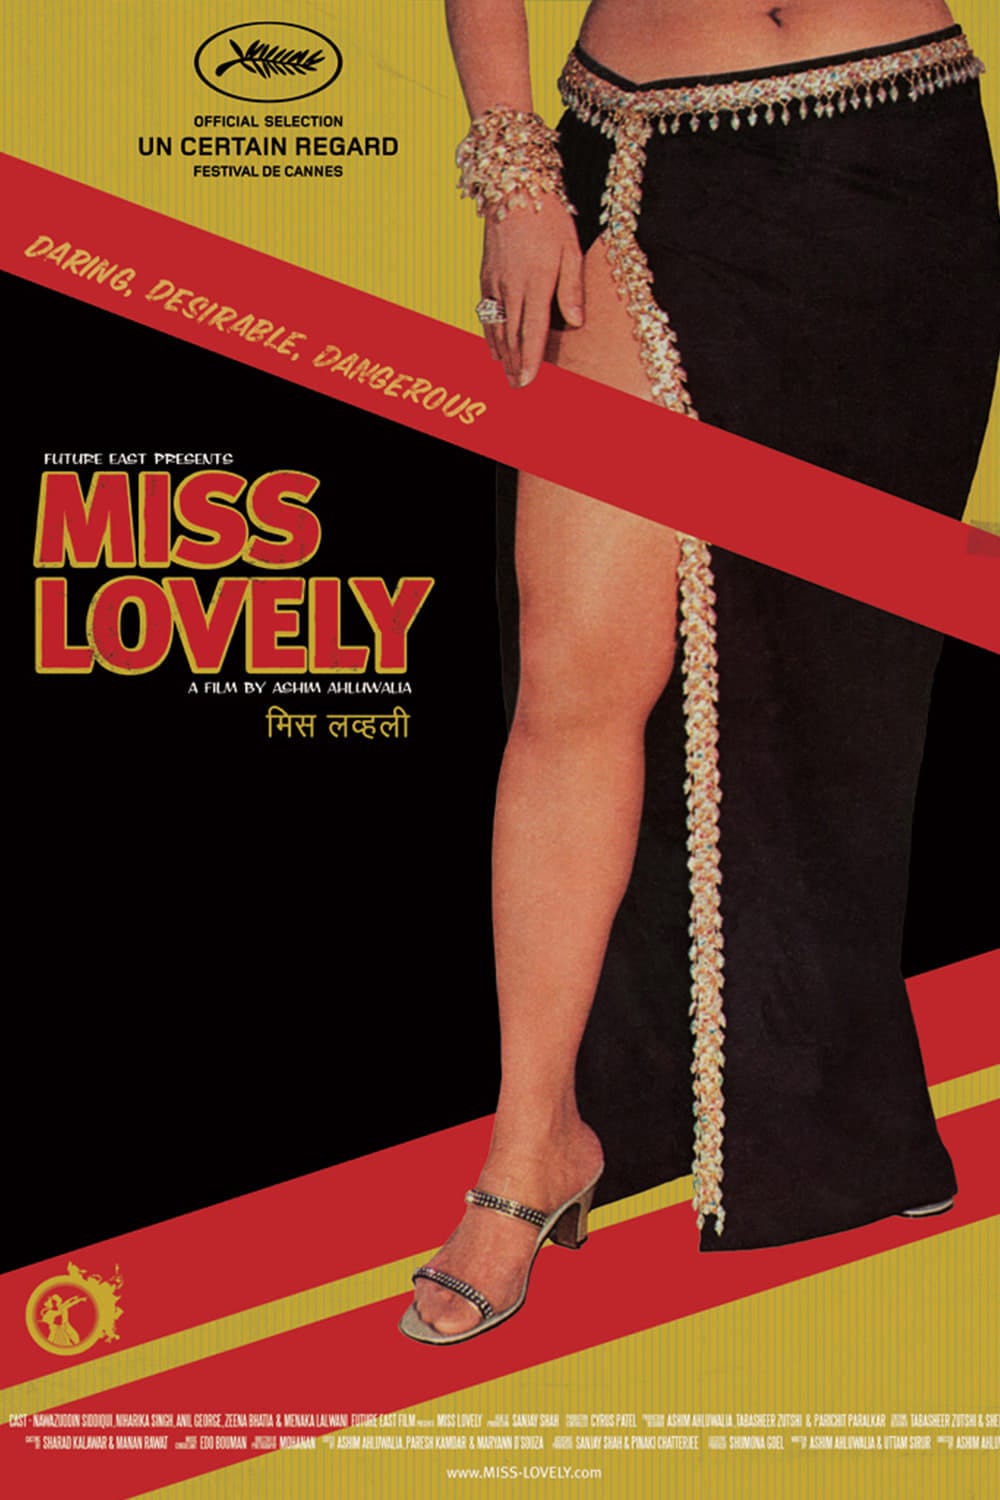 Poster for the movie "Miss Lovely"